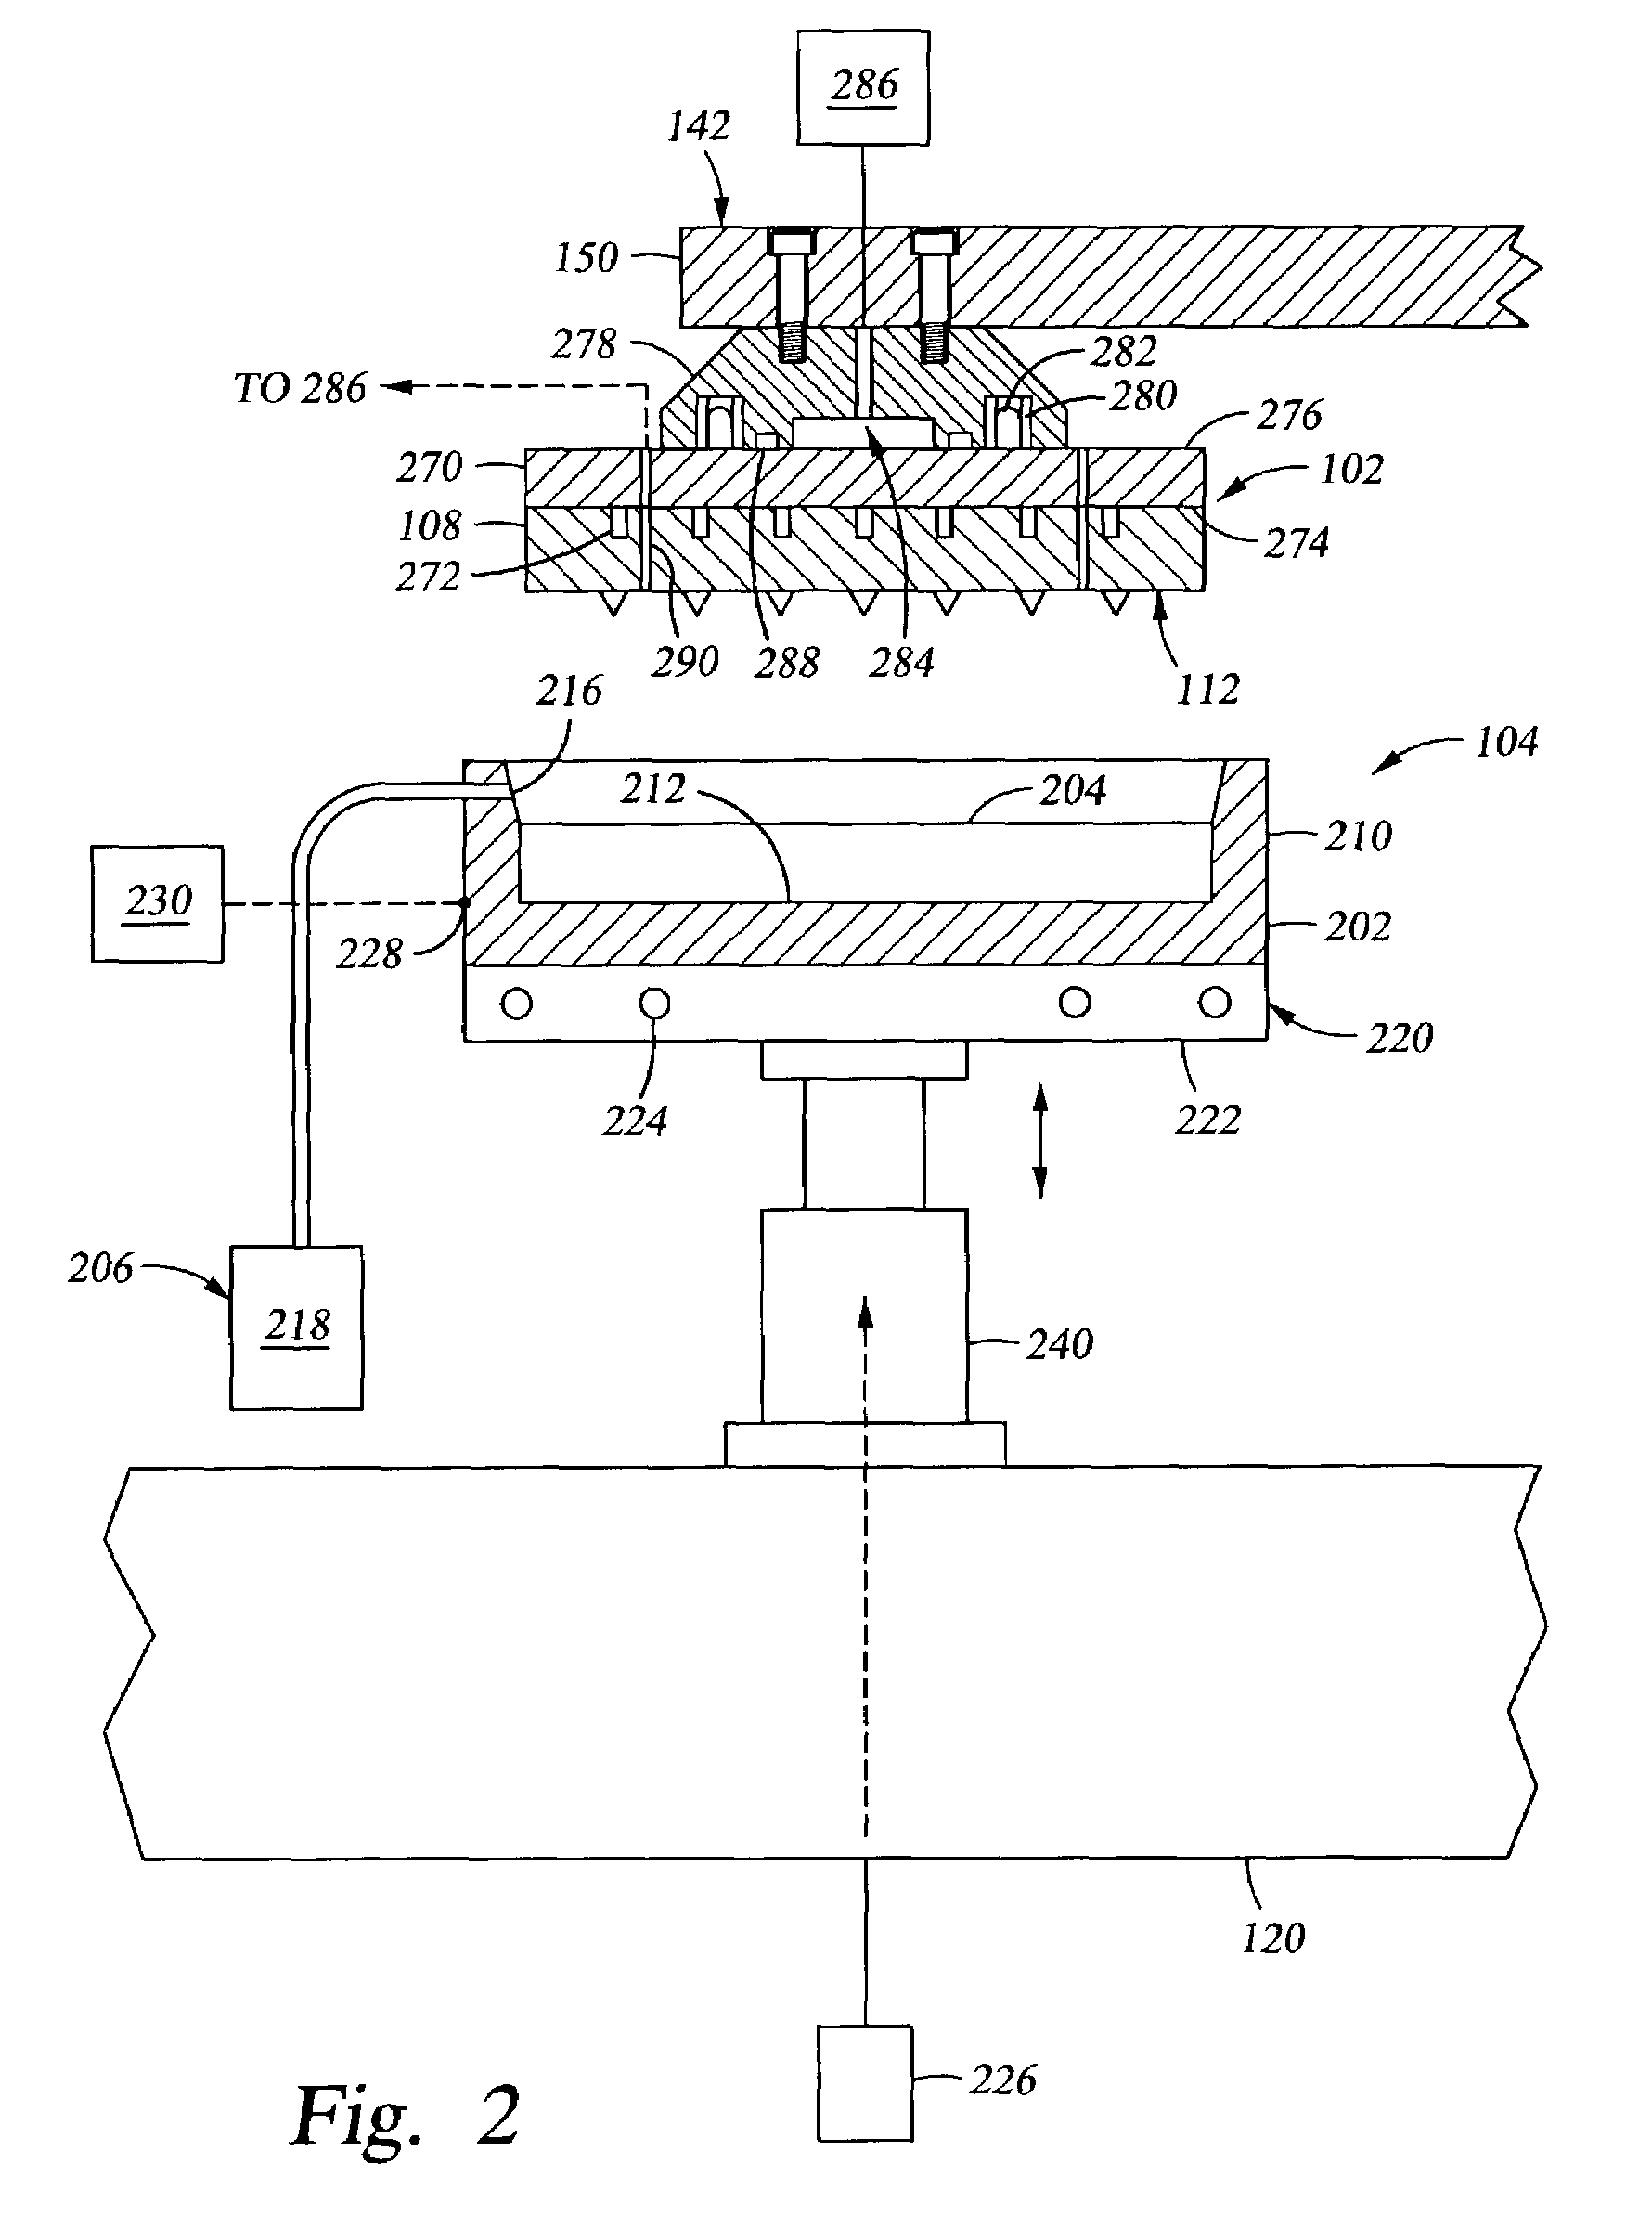 Method and apparatus for metallization of large area substrates